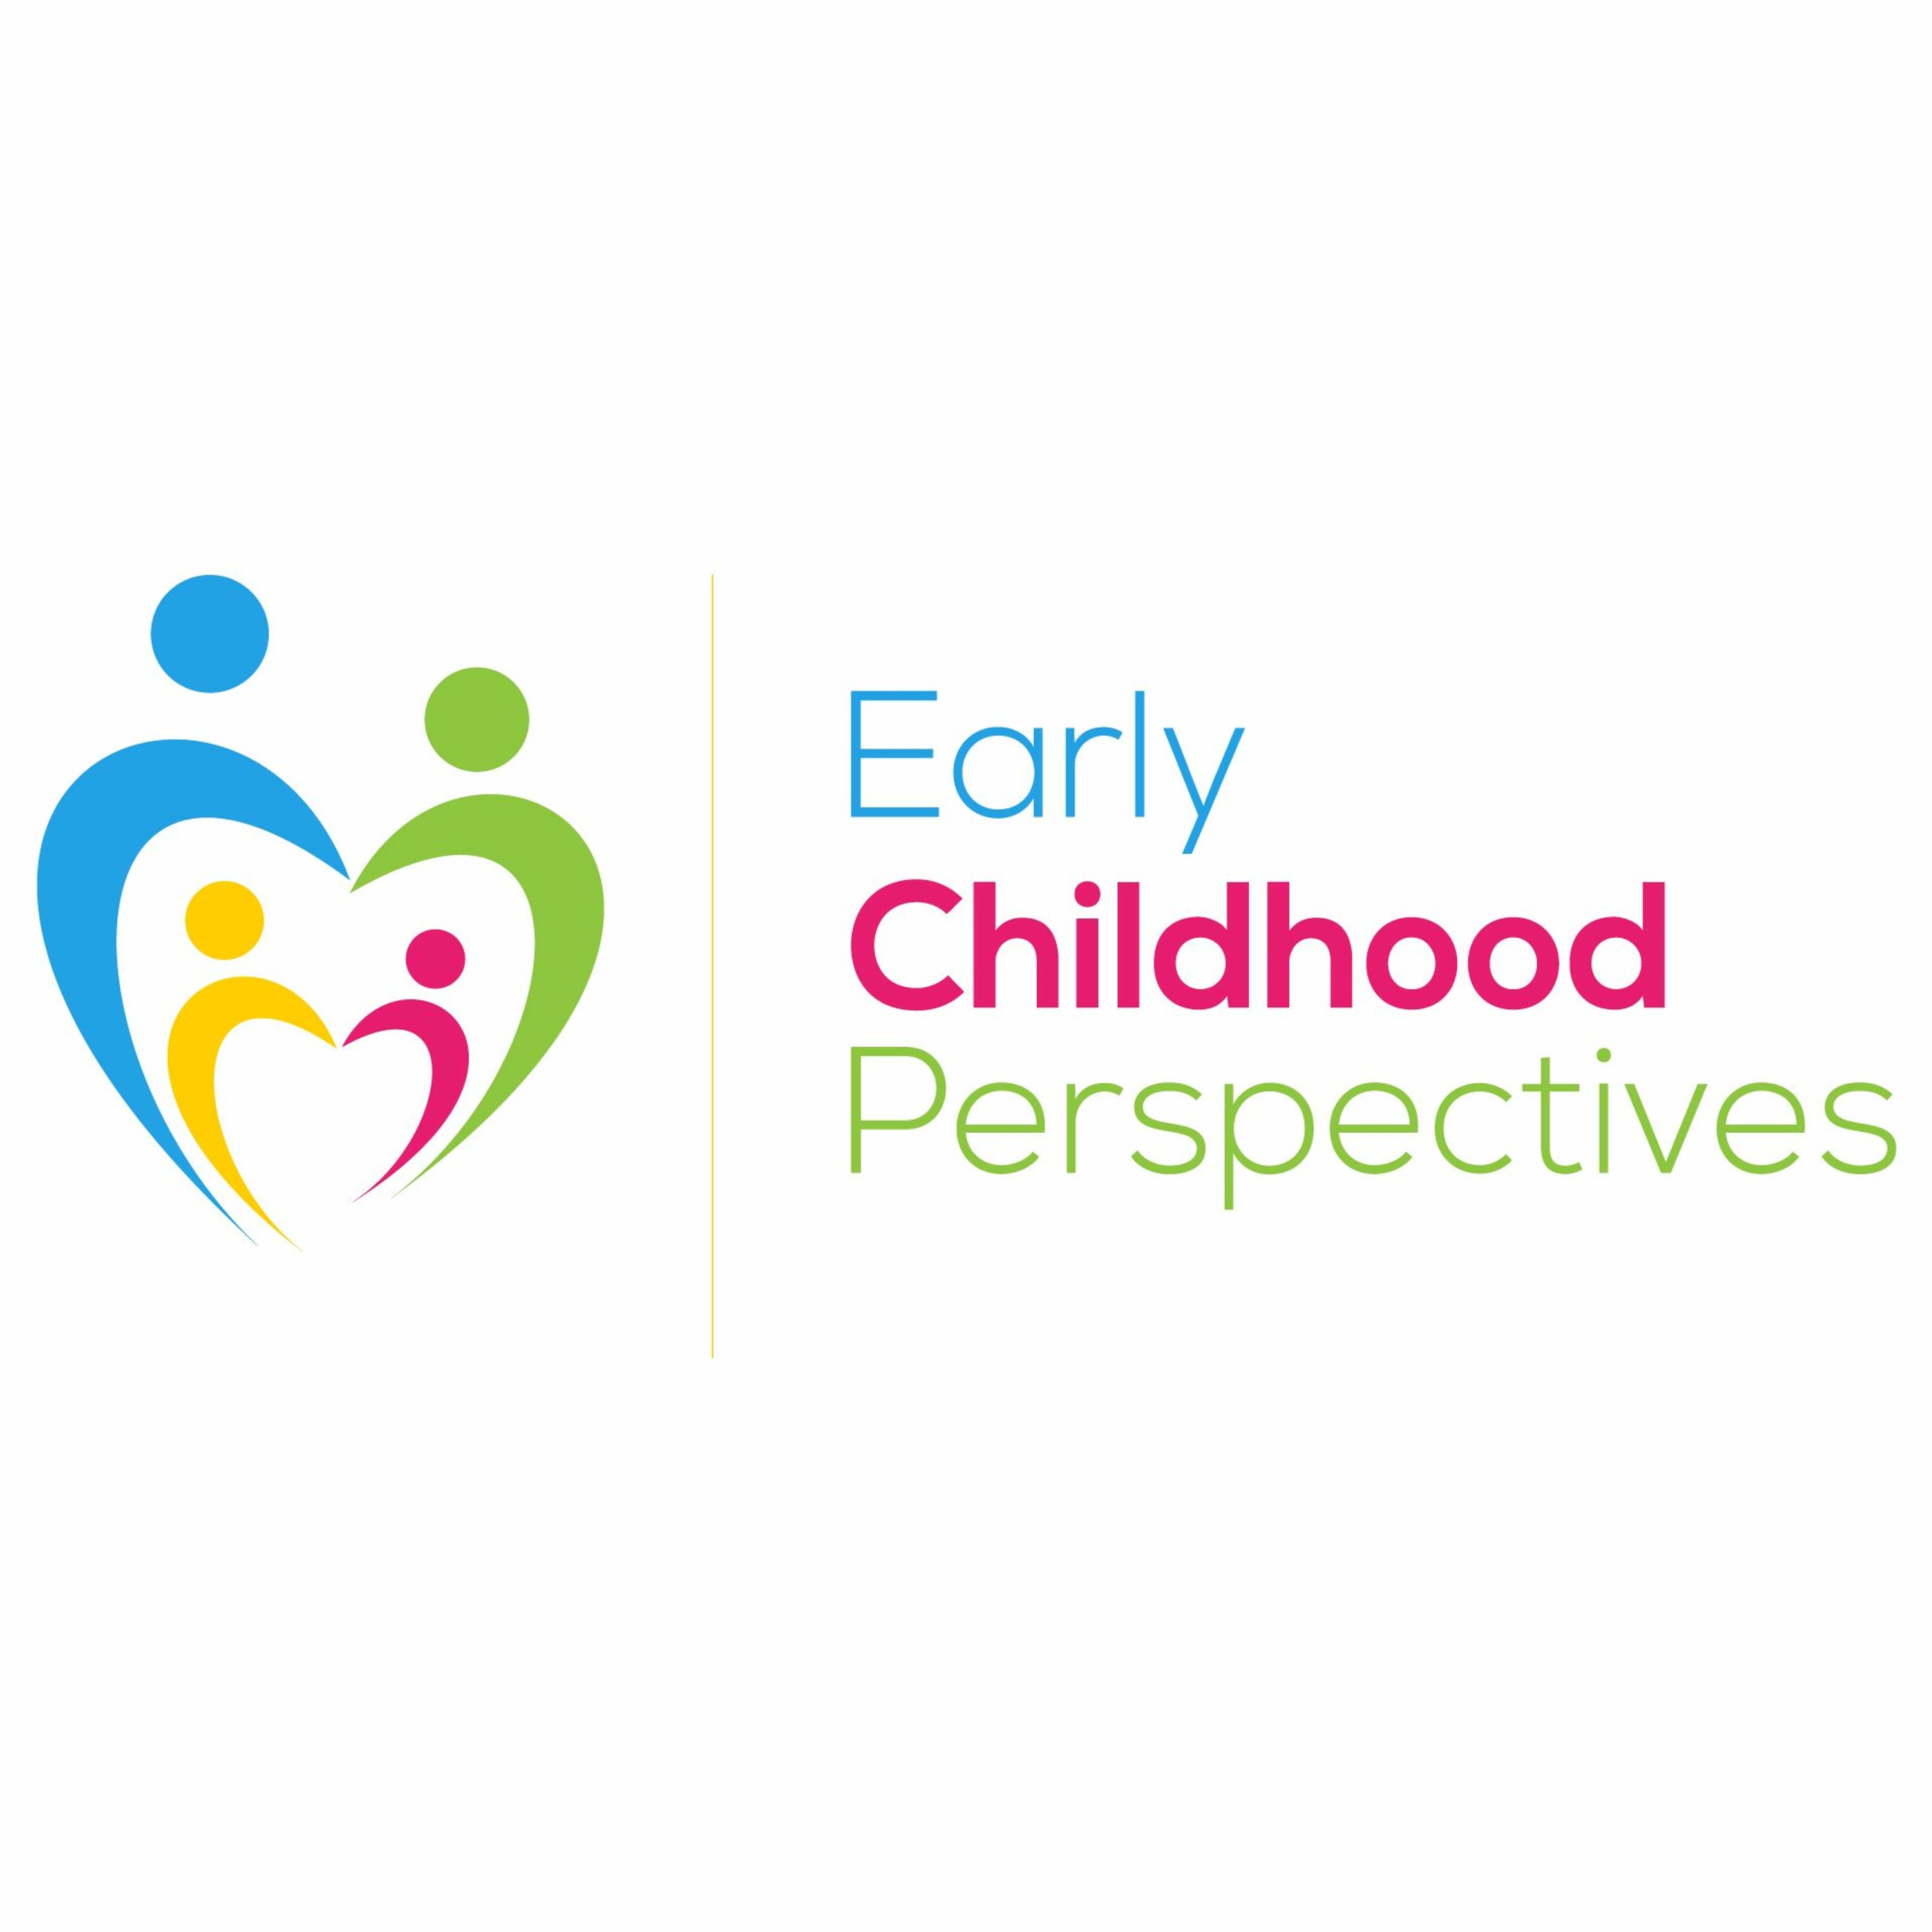 Early Childhood Perspectives #21: Getting your passion back